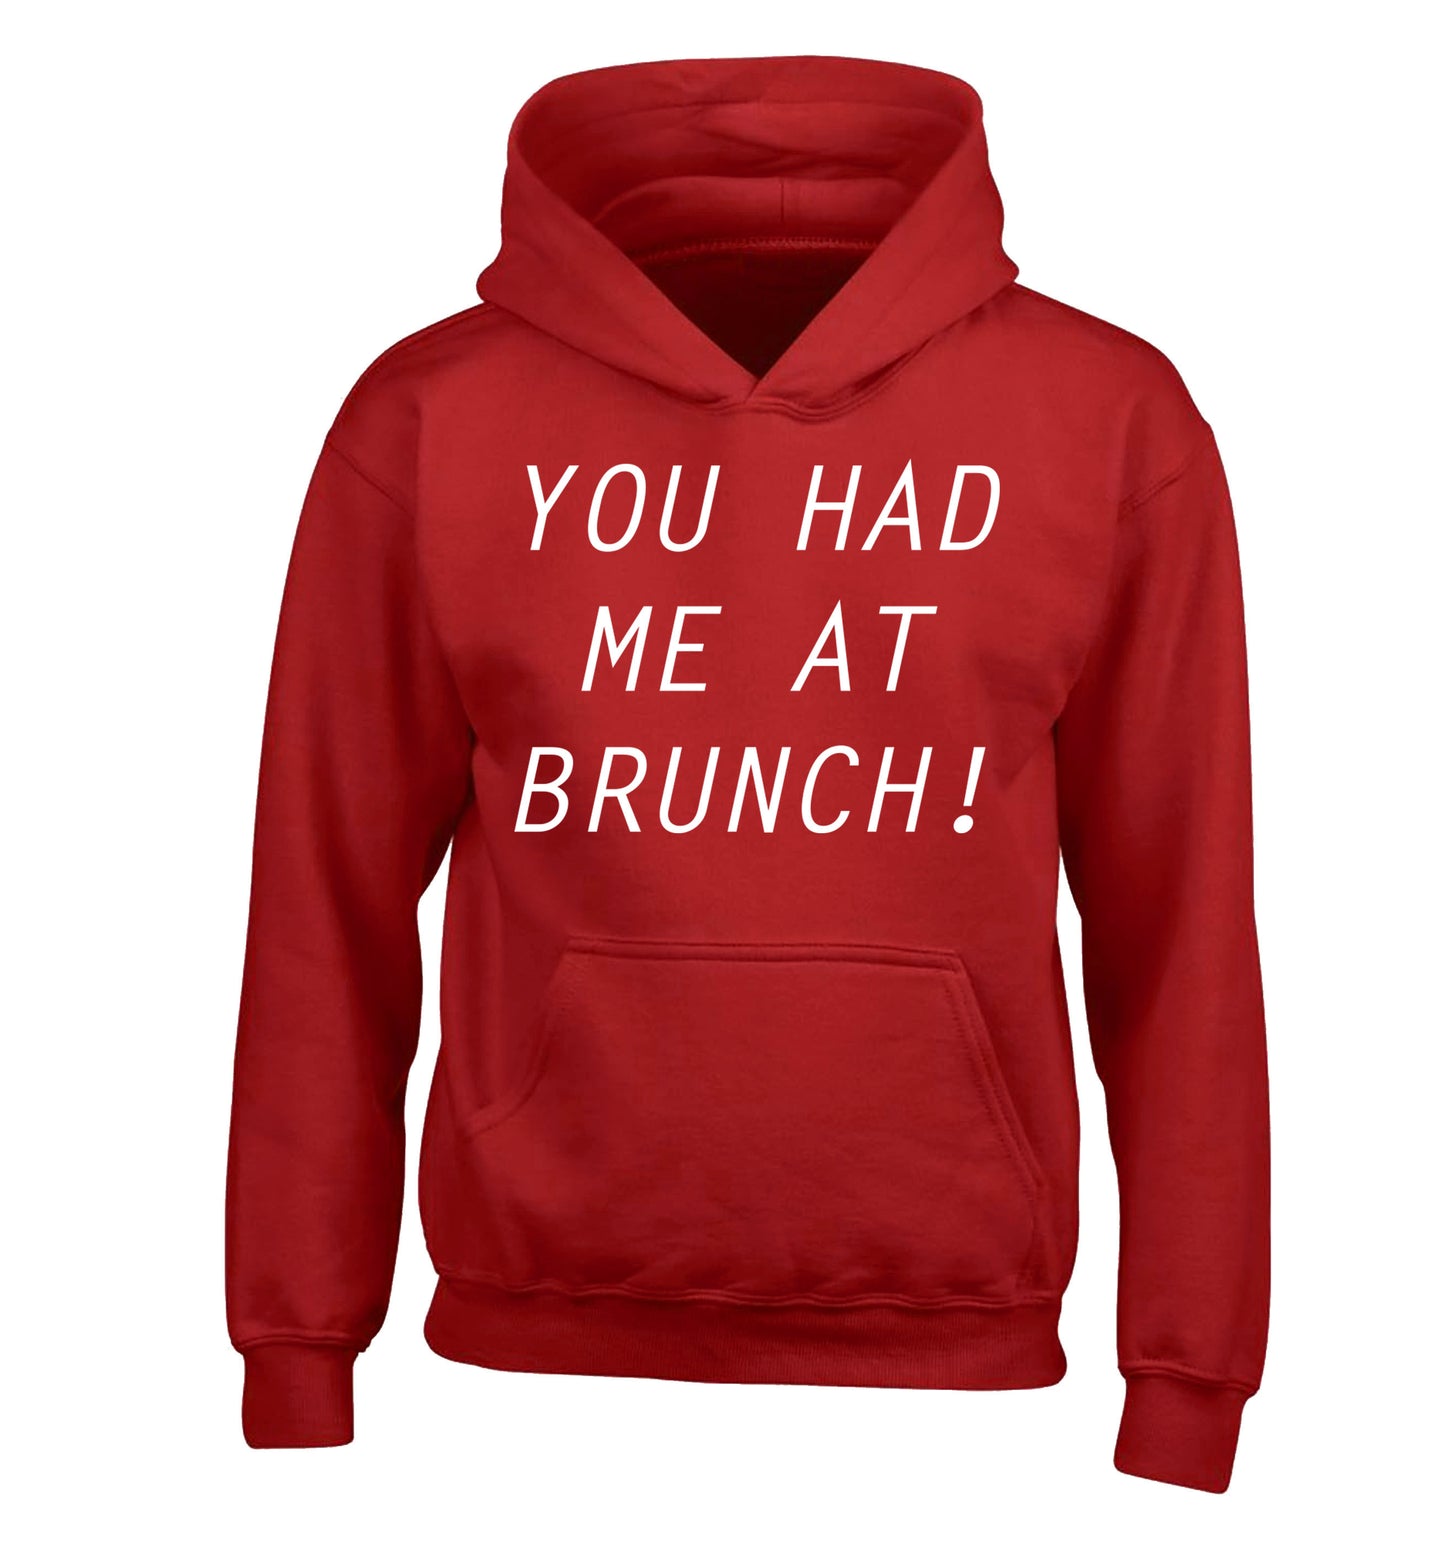 You had me at brunch children's grey sweater 12-14 Years